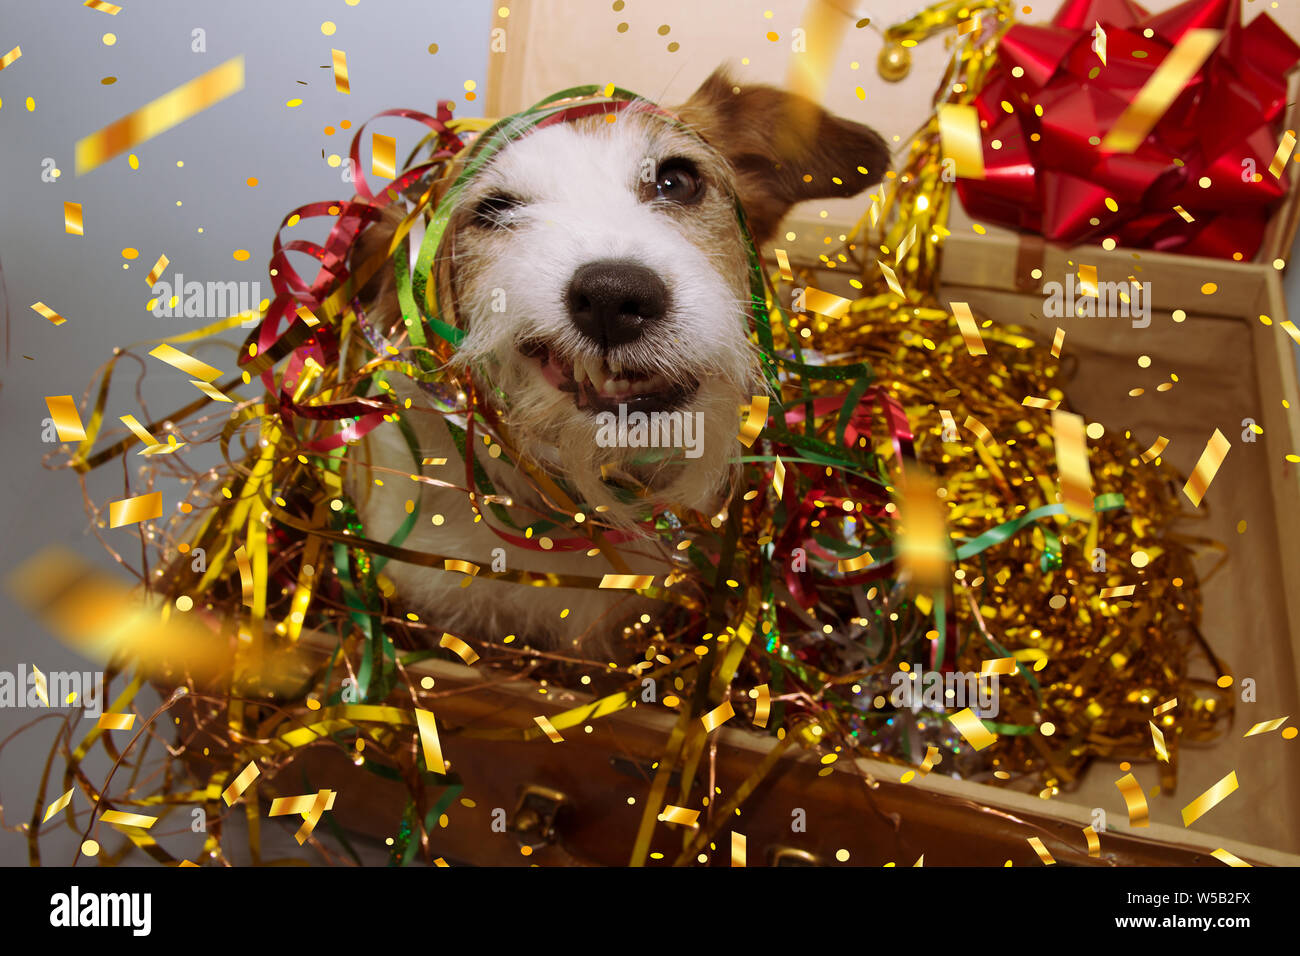 Funny jack russell dog between golden colorful serpentine streamers inside  a vintga suitcase celebrating new year, birthday or carnival Stock Photo -  Alamy